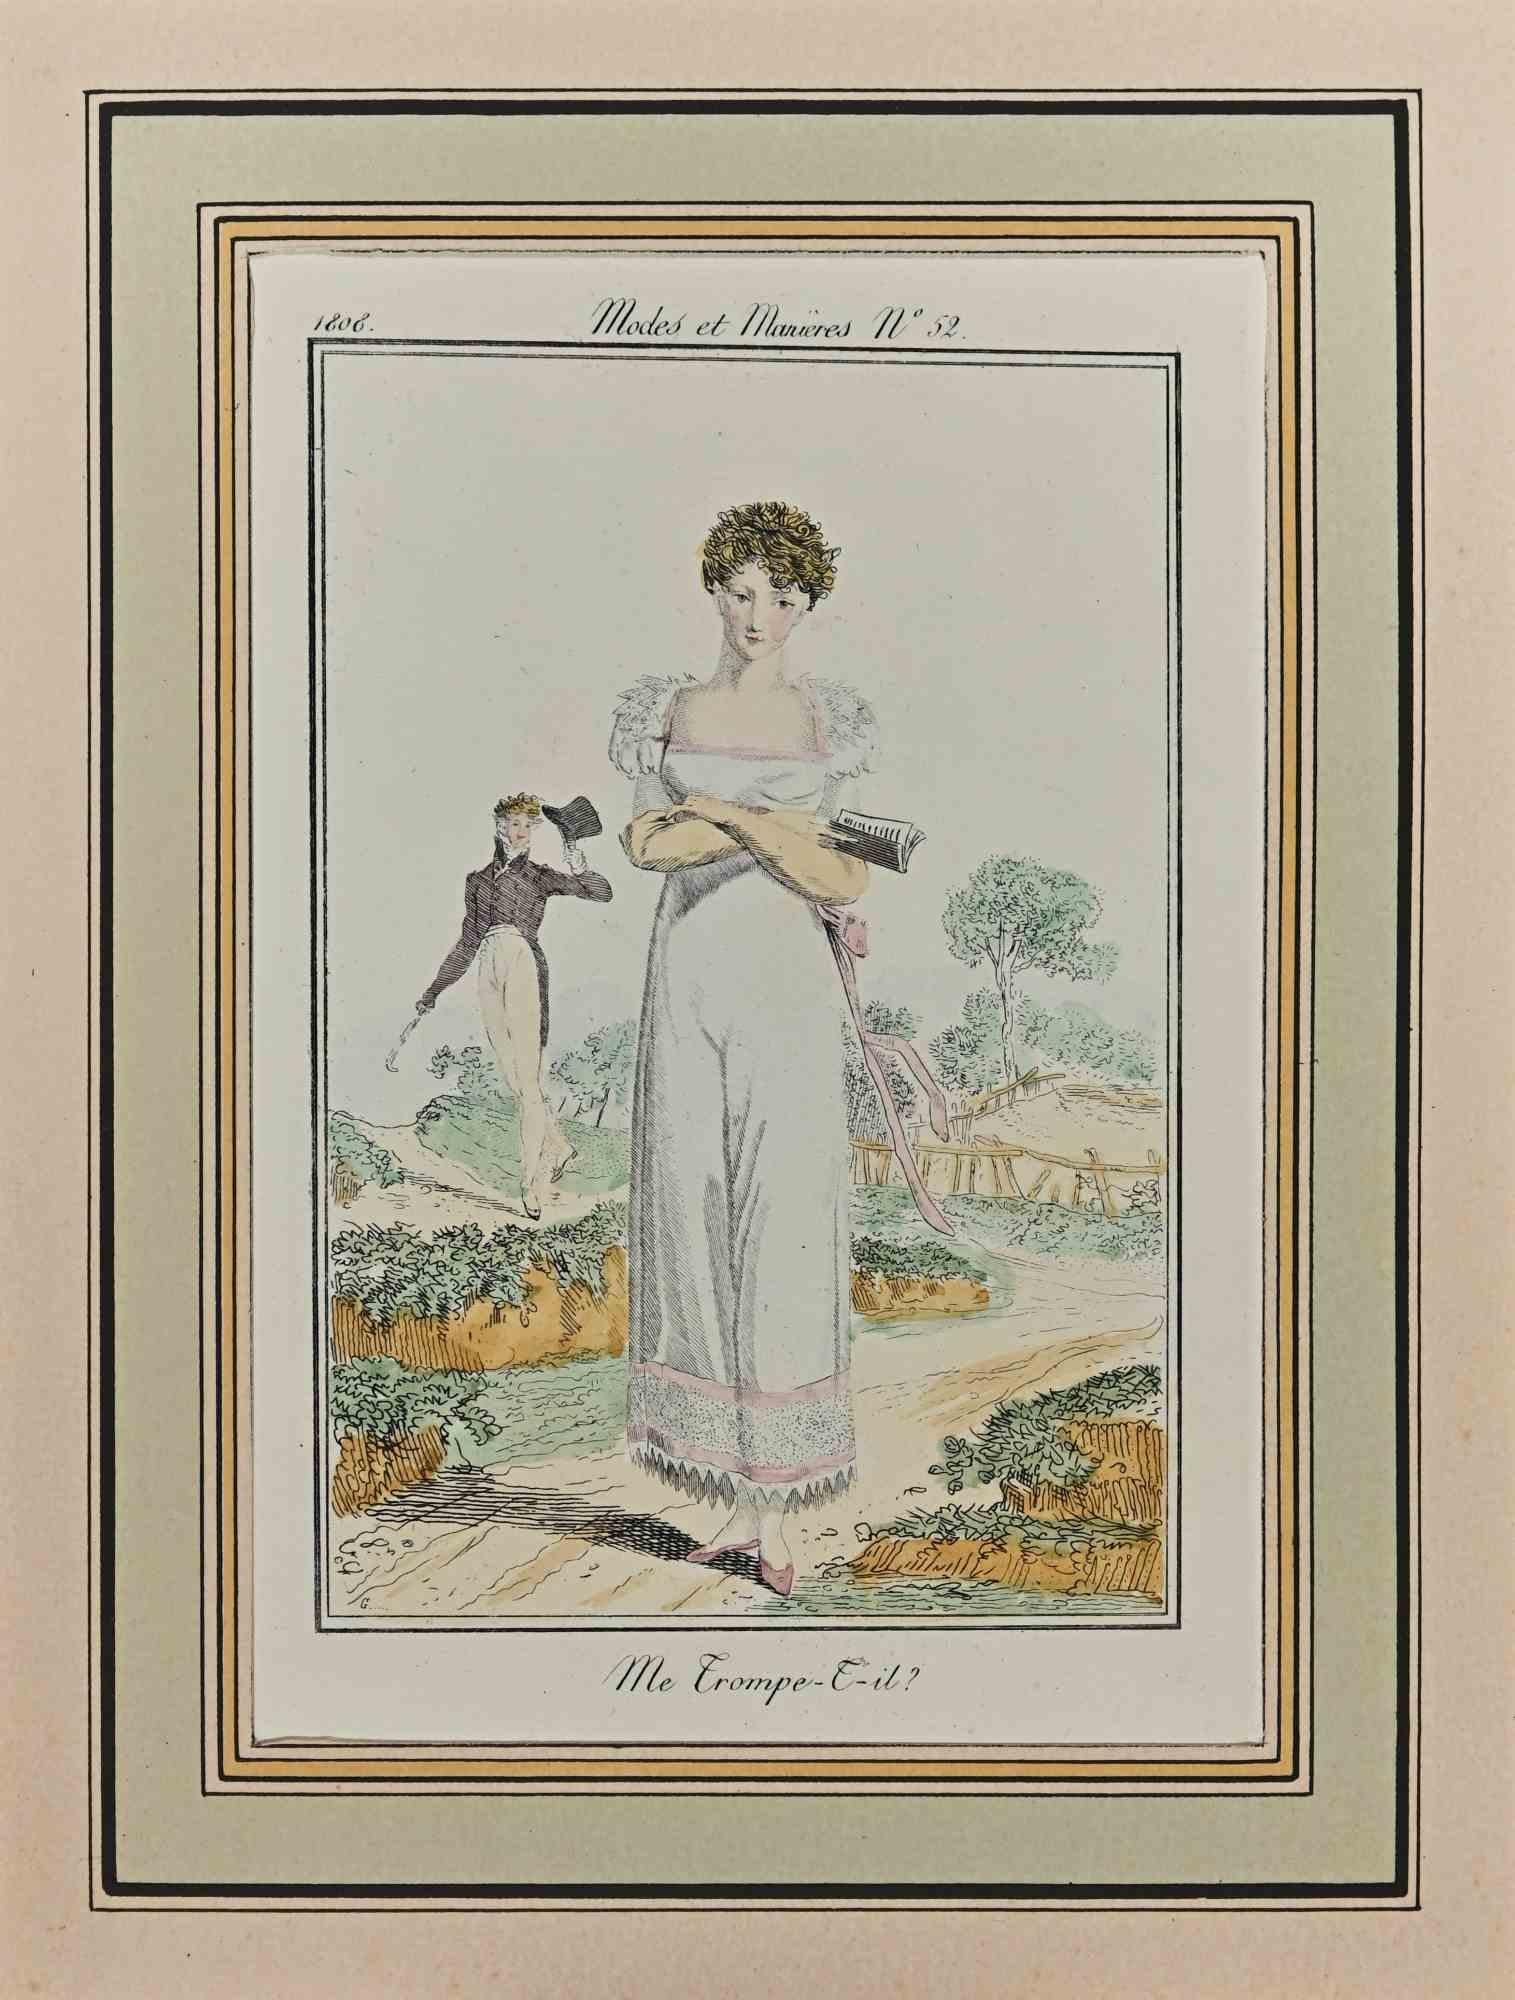 Me Trompe-T-Il? is an Original Etching Hand Watercolored series "CMode et Manières" published in 1808 by the Journald des Dames et des Modes".

Mode et Manières - Model n.  is 52 an original watercolored print realized in 1808. 

The artwork is the